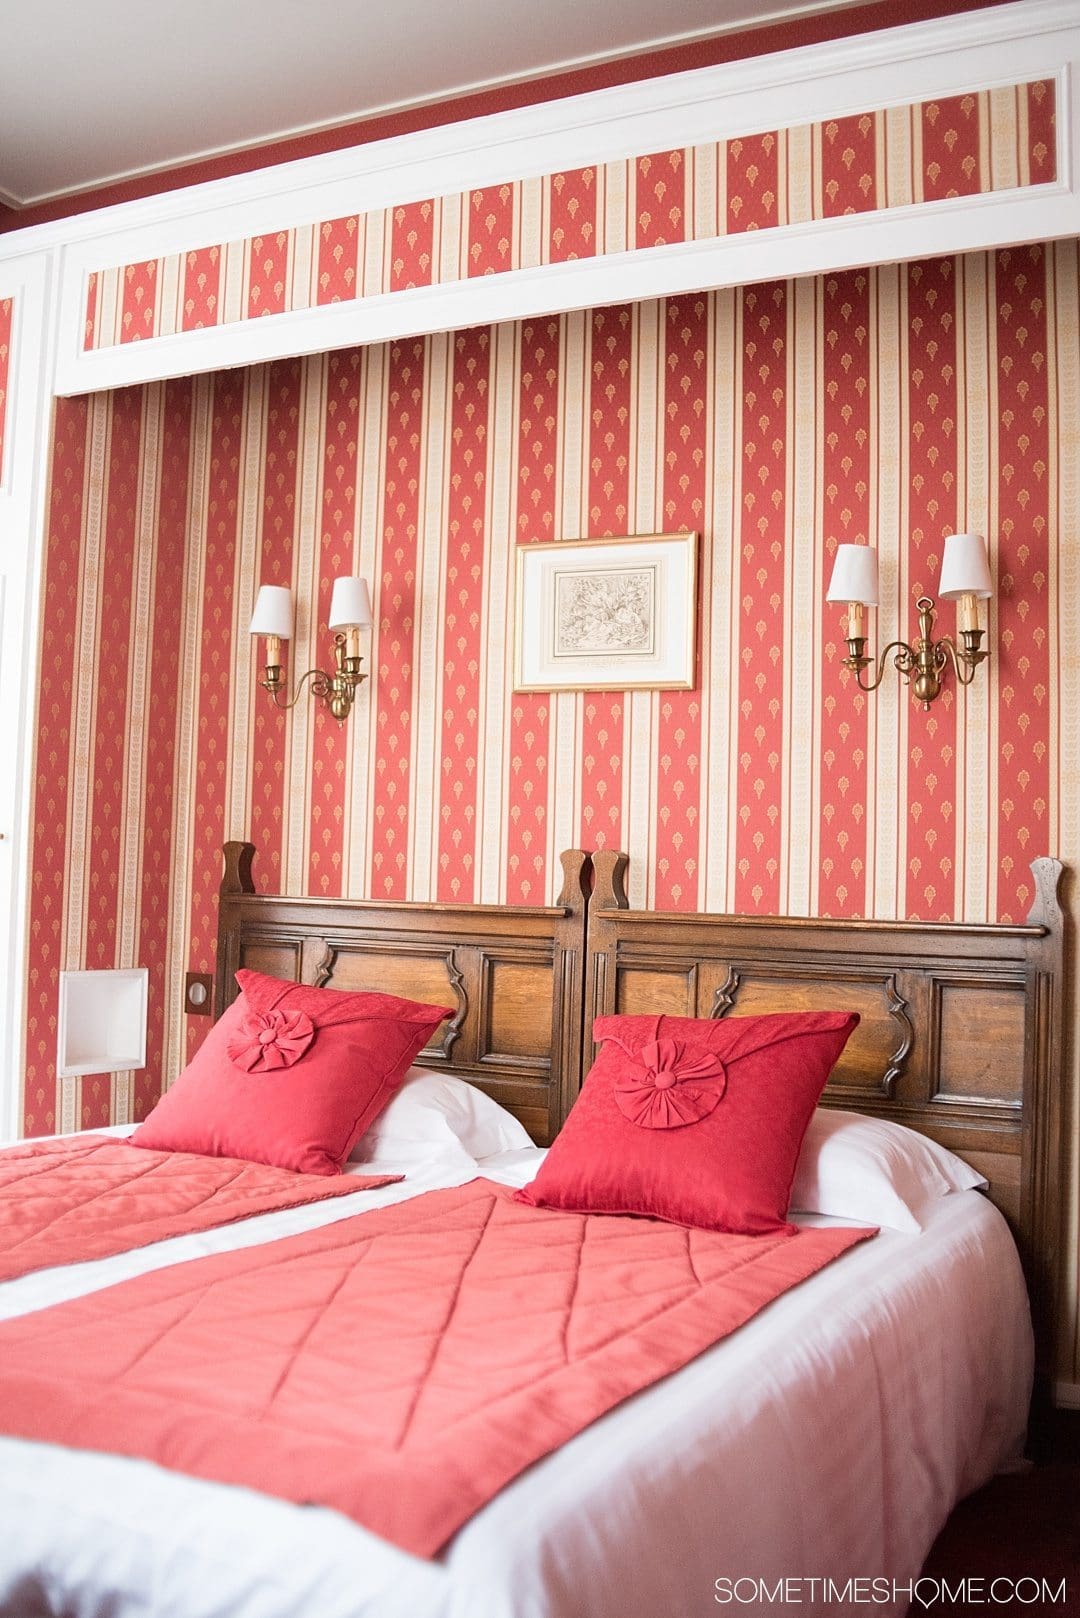 Paris hotel cozy boutique accommodation with very affordable prices in the historic Le Marais district. Click through to the article for a complete review!